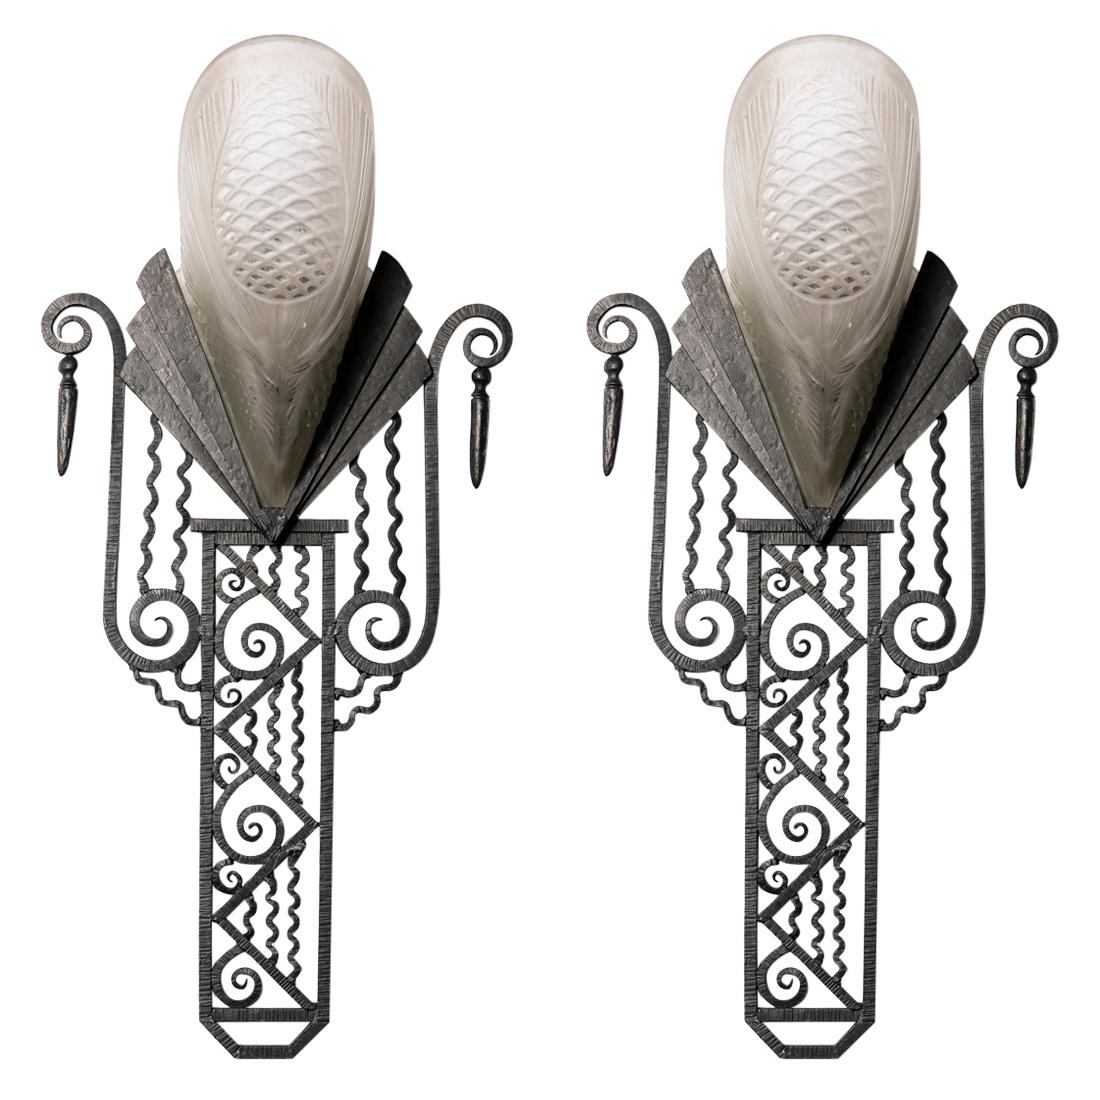 Pair of Sabino Glass and Wrought Iron Sconces, France, circa 1930